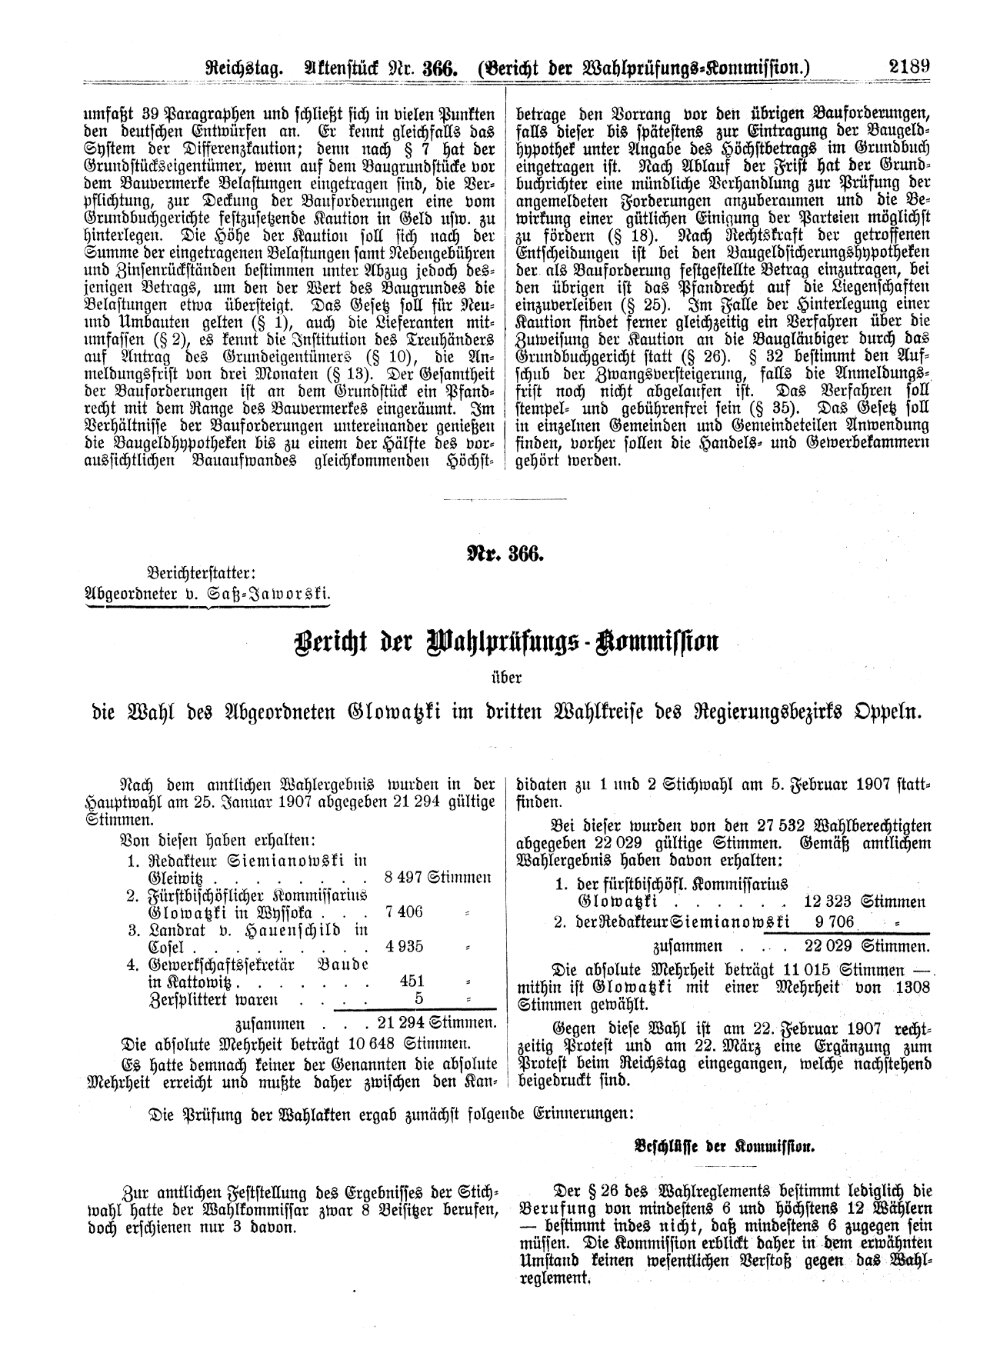 Scan of page 2189